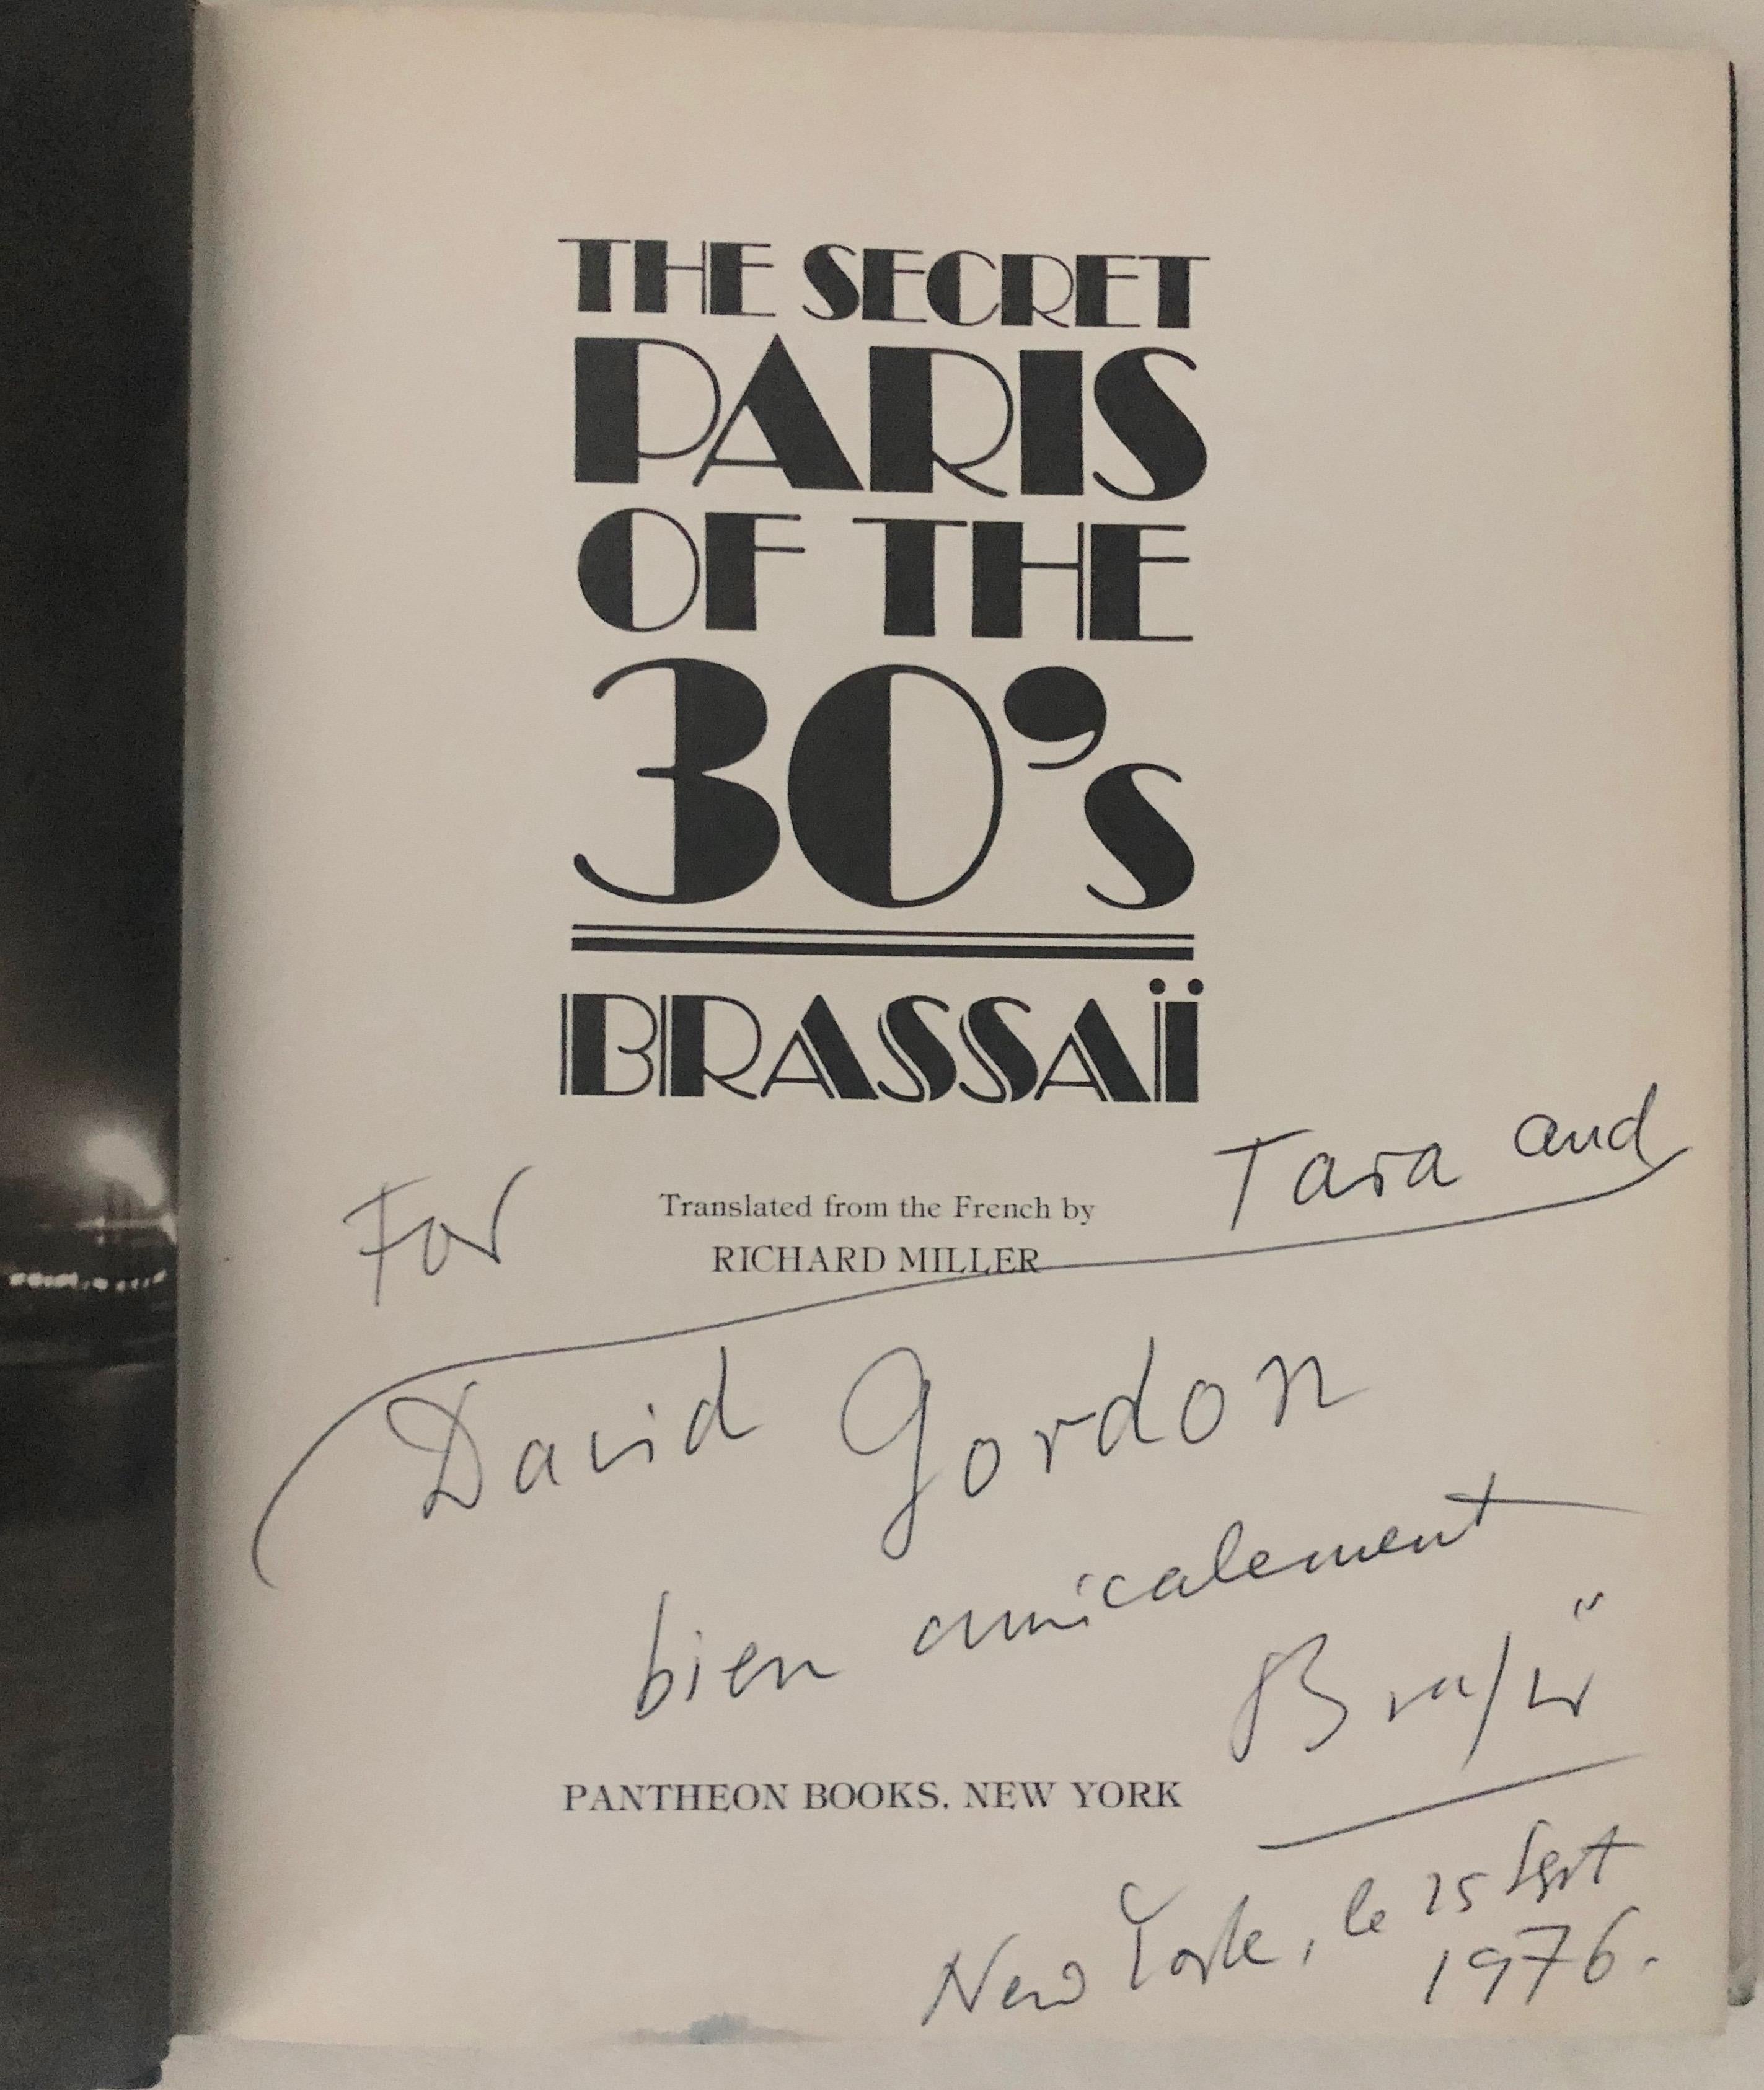 A beautifully signed copy of Brassai's 